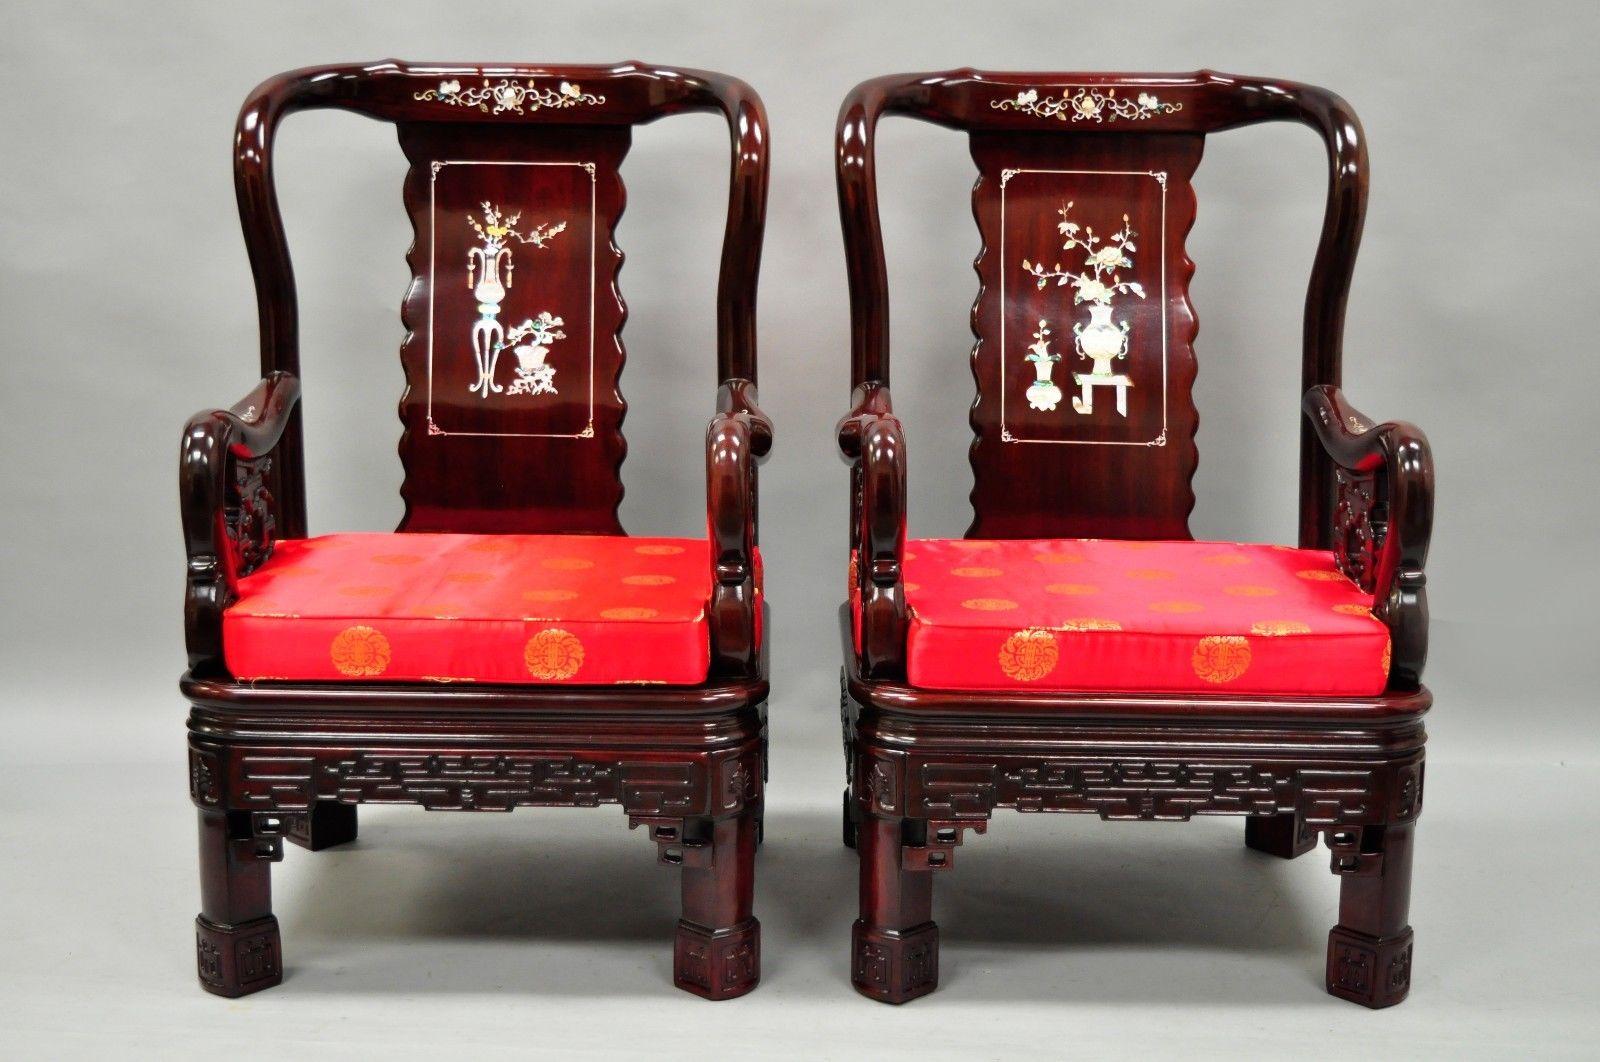 Pair of Oriental Lounge Chairs with Mother of Pearl Inlay.  Item features heavy solid wood construction, Nicely carved details, Mother of Pearl inlay to back and armrests, Removable silk upholstered red seat cushions, Fine quality and stately form.